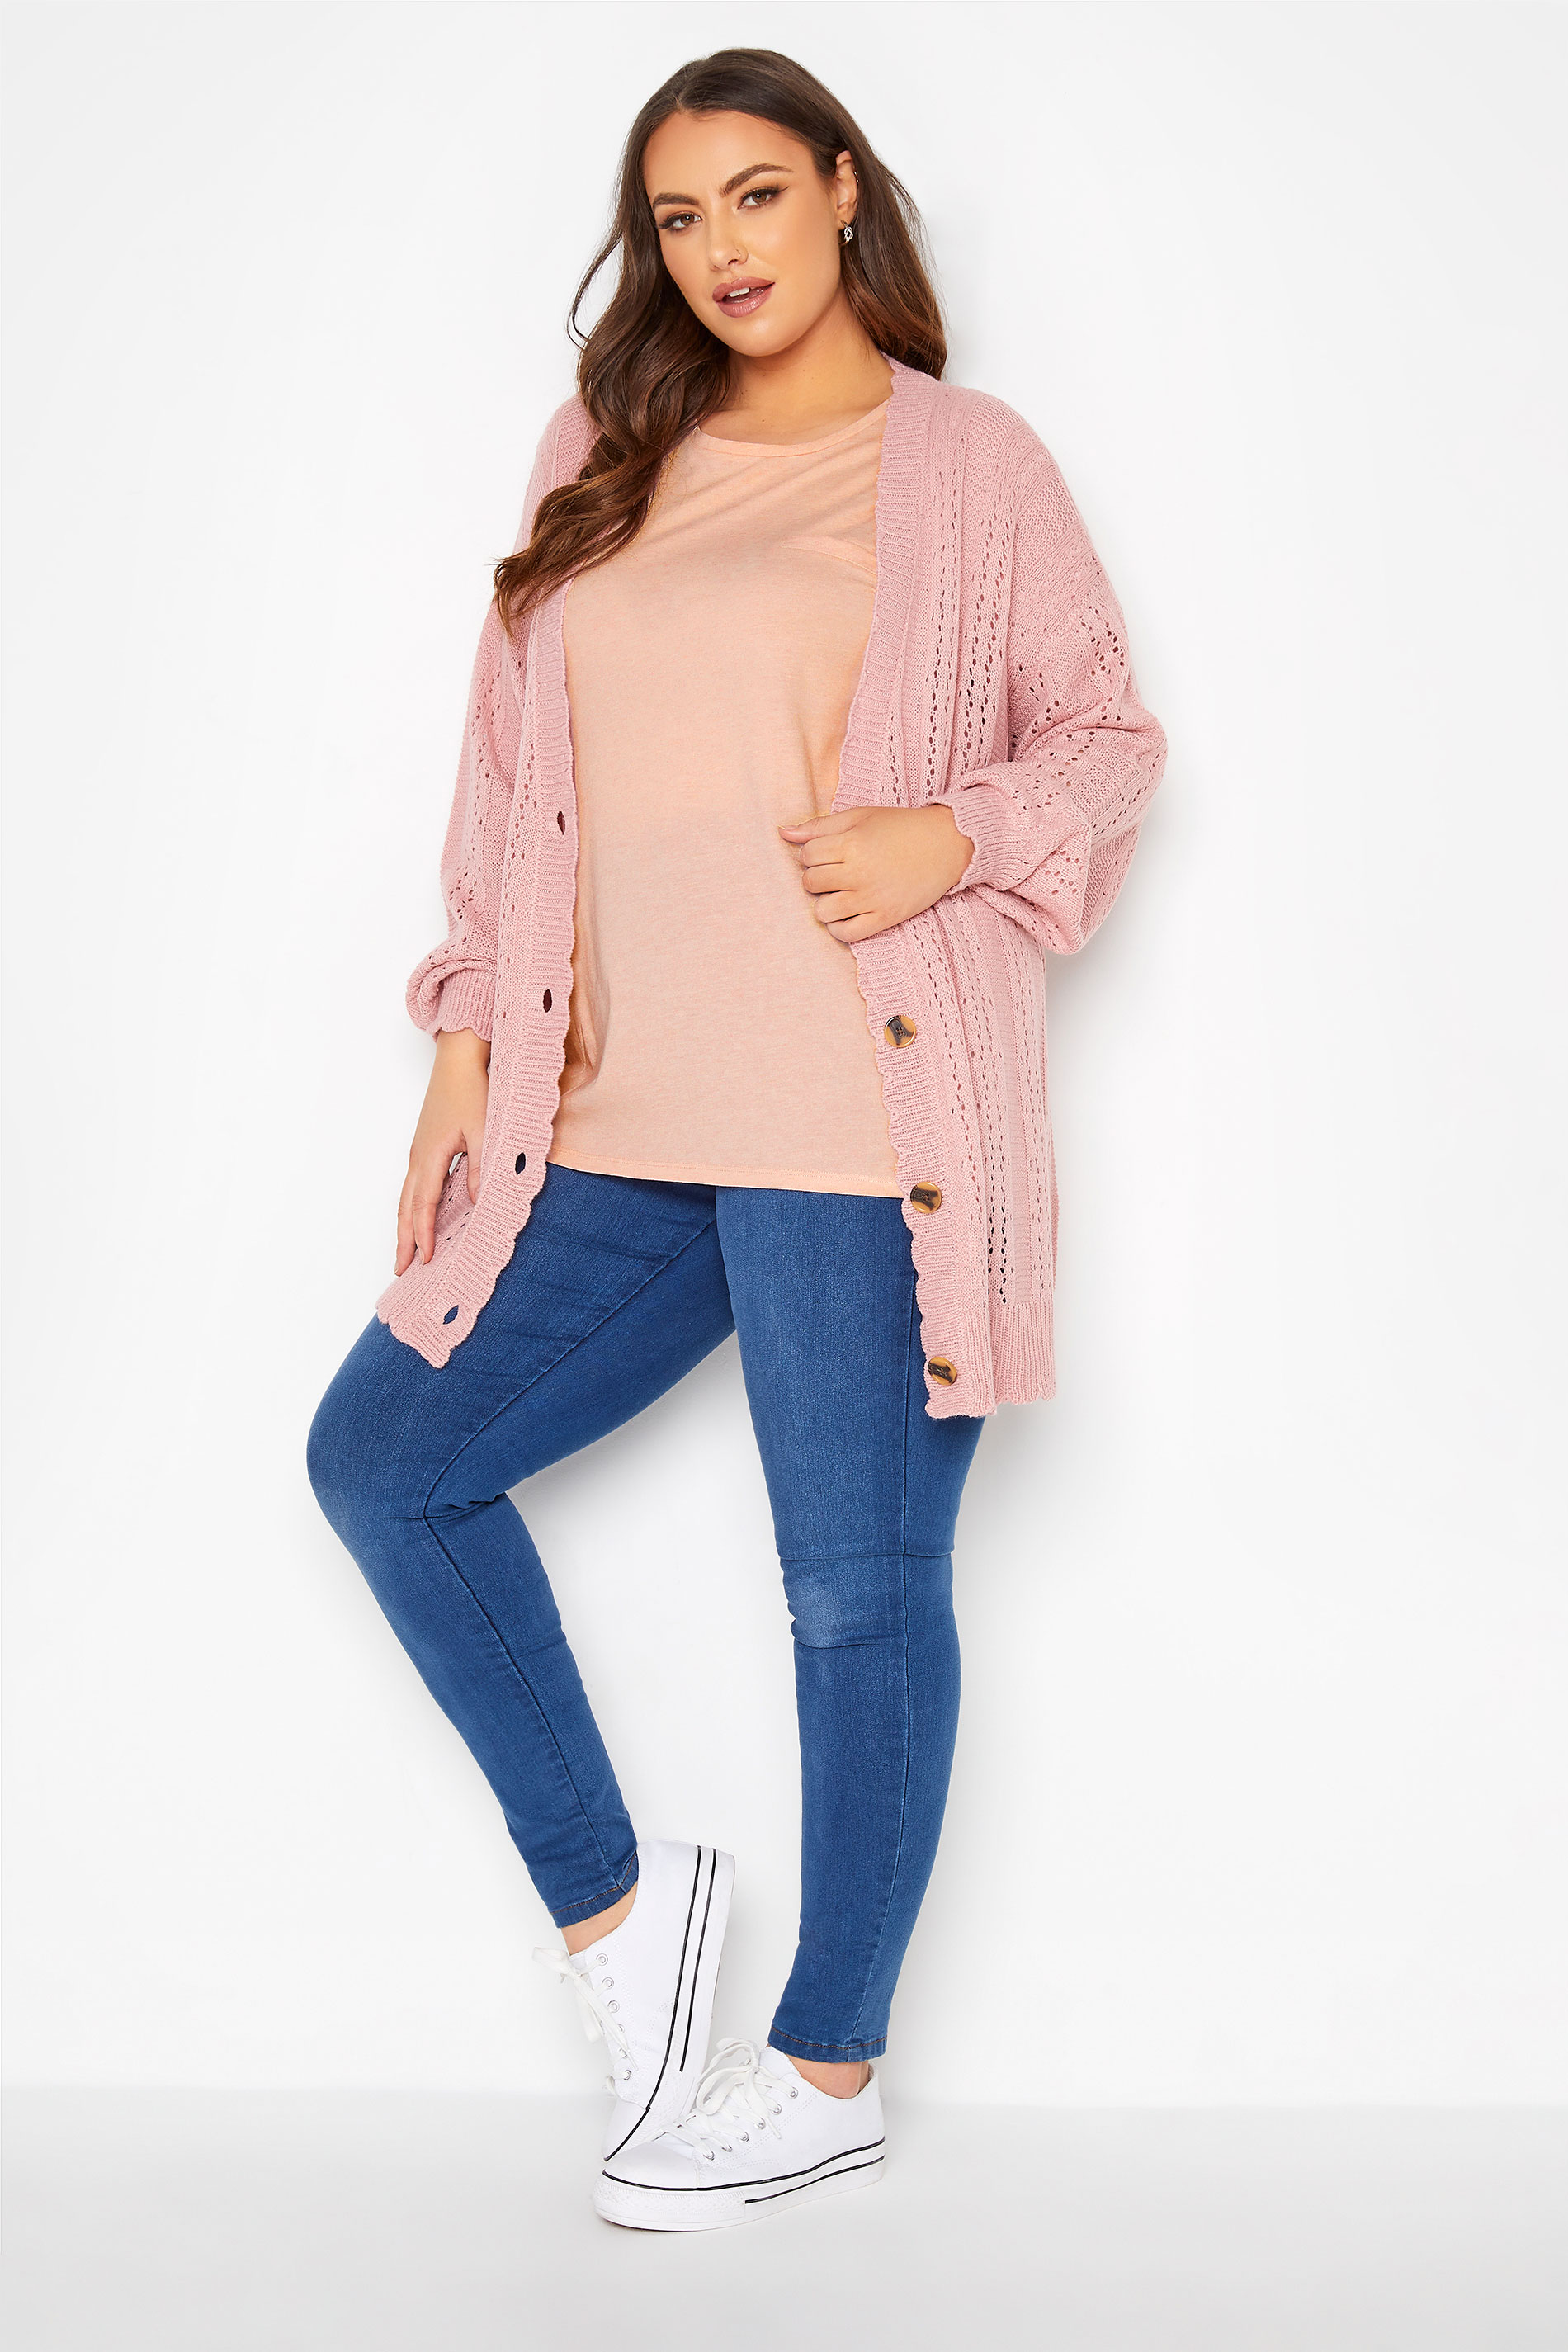 Grande taille  Tops Grande taille  Tops Casual | YOURS FOR GOOD - T-Shirt Rose Pâle en Coton Mixte - MJ87276